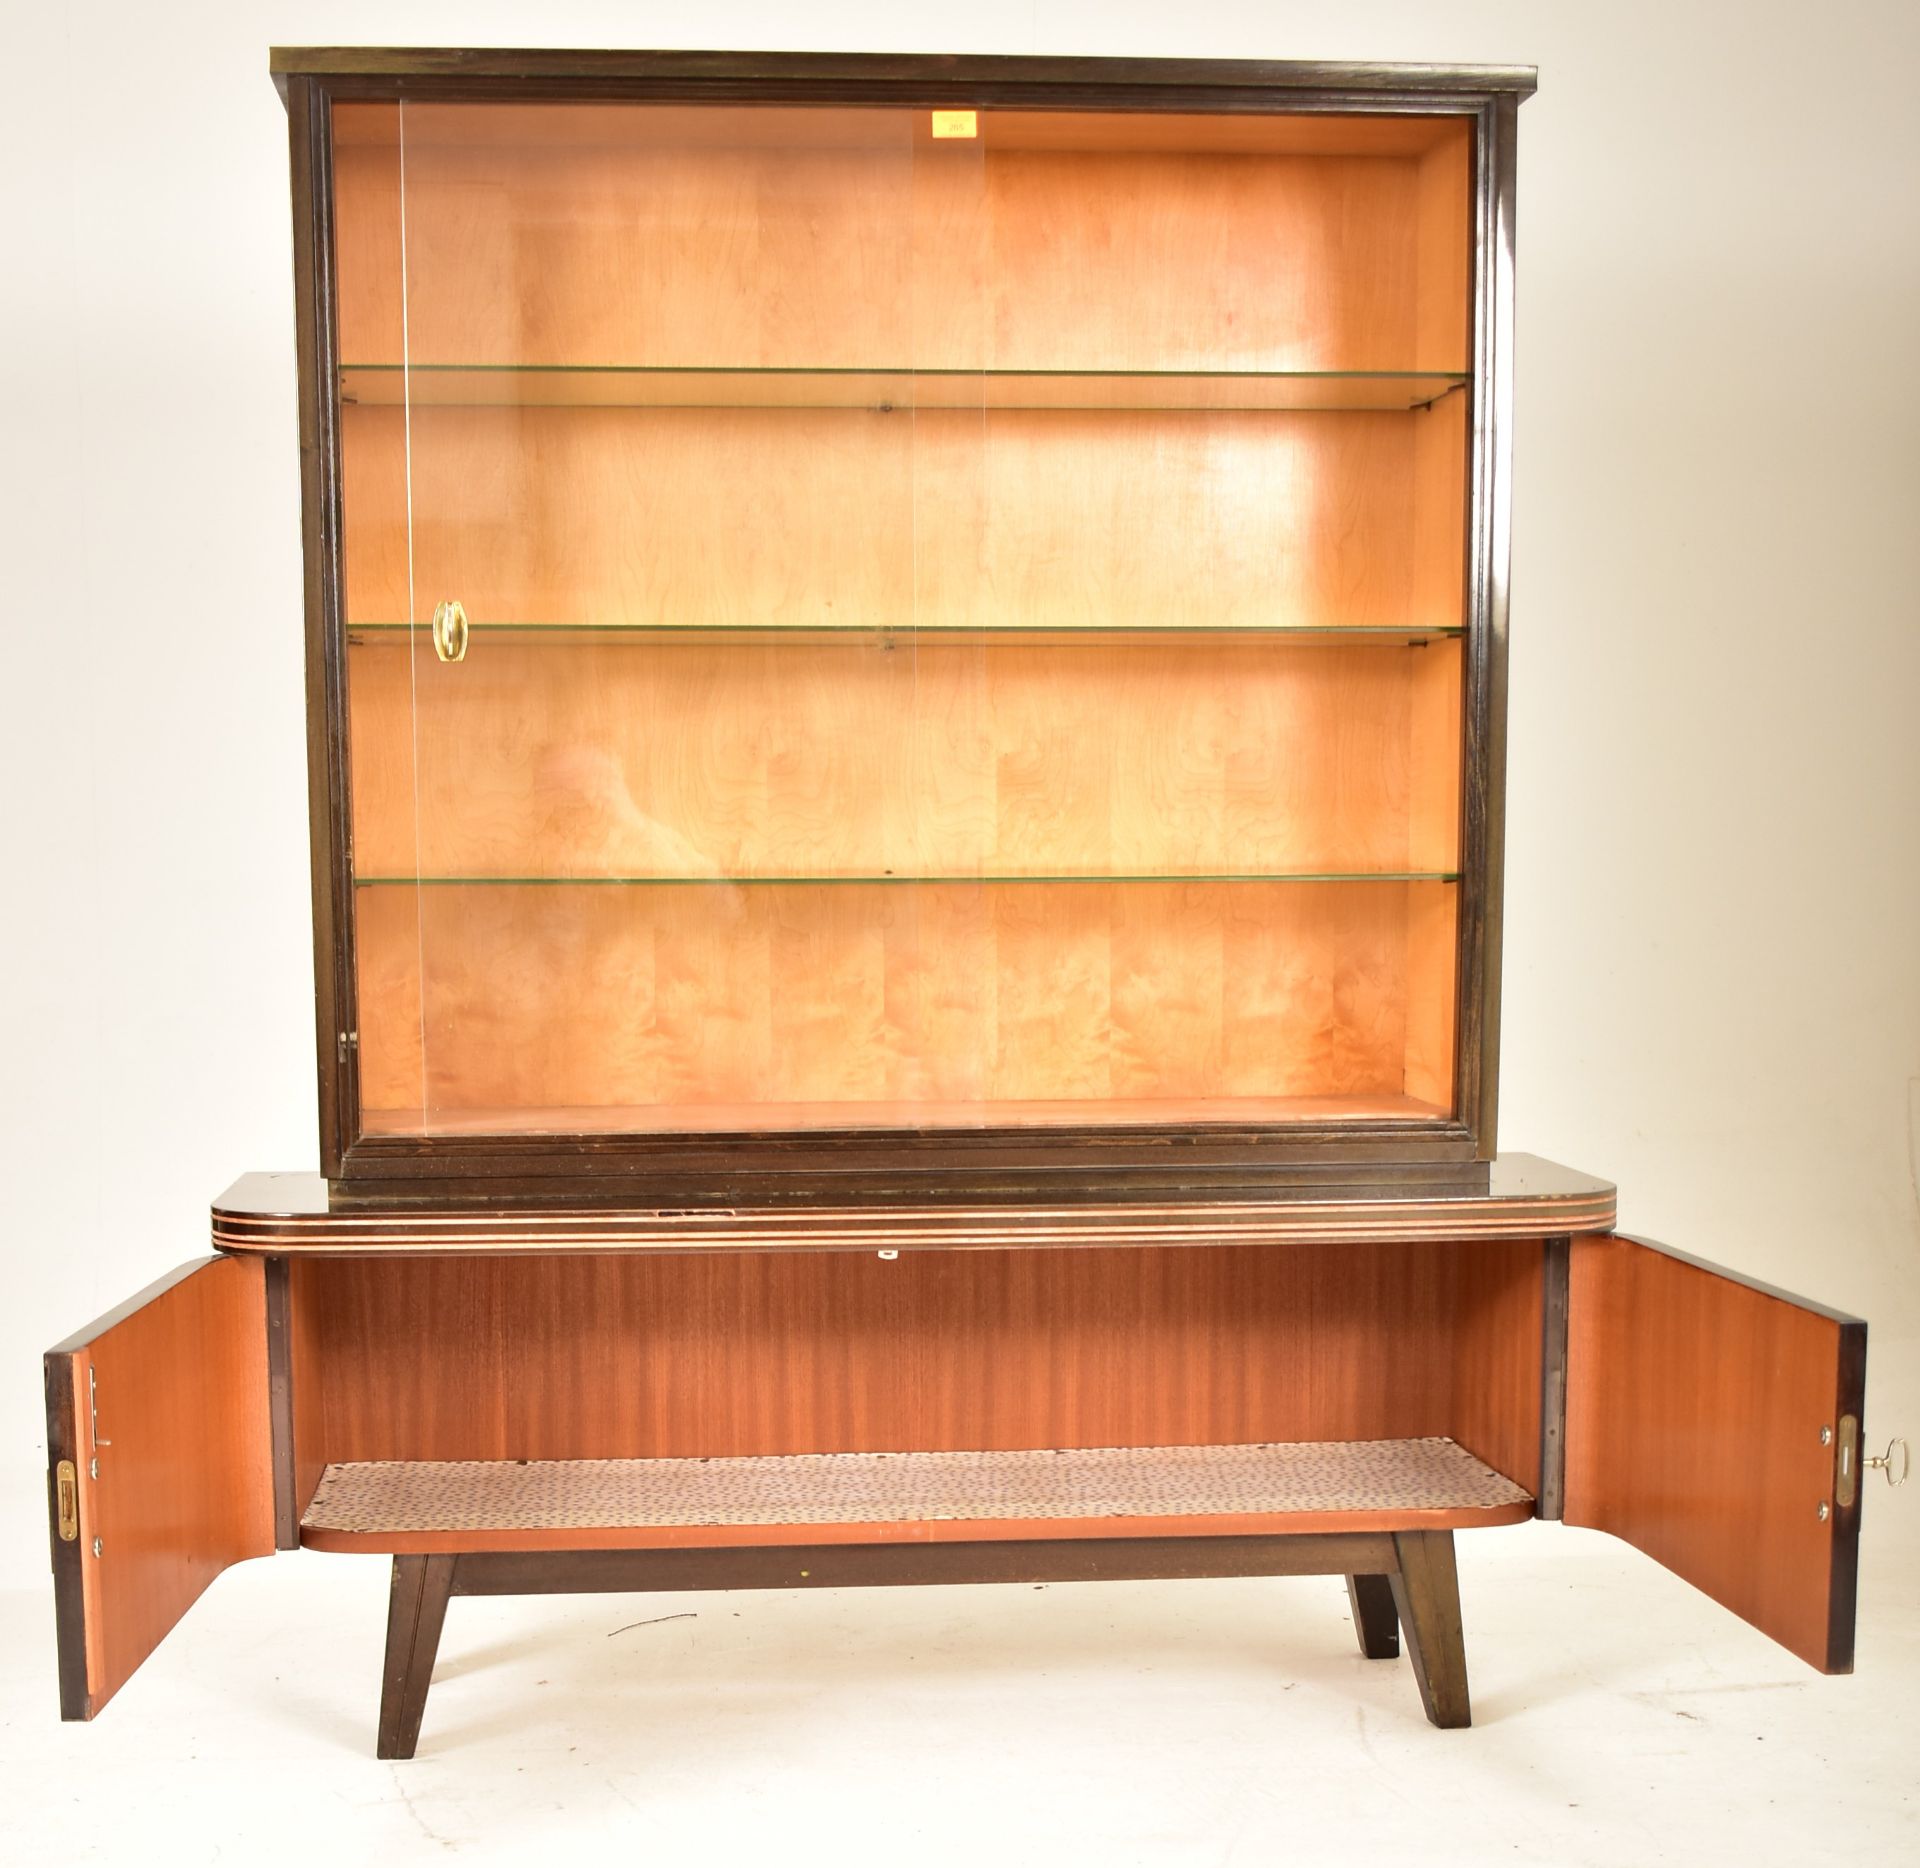 MID 20TH CENTURY GERMAN DESIGNER CABINET ON STAND - Image 6 of 8